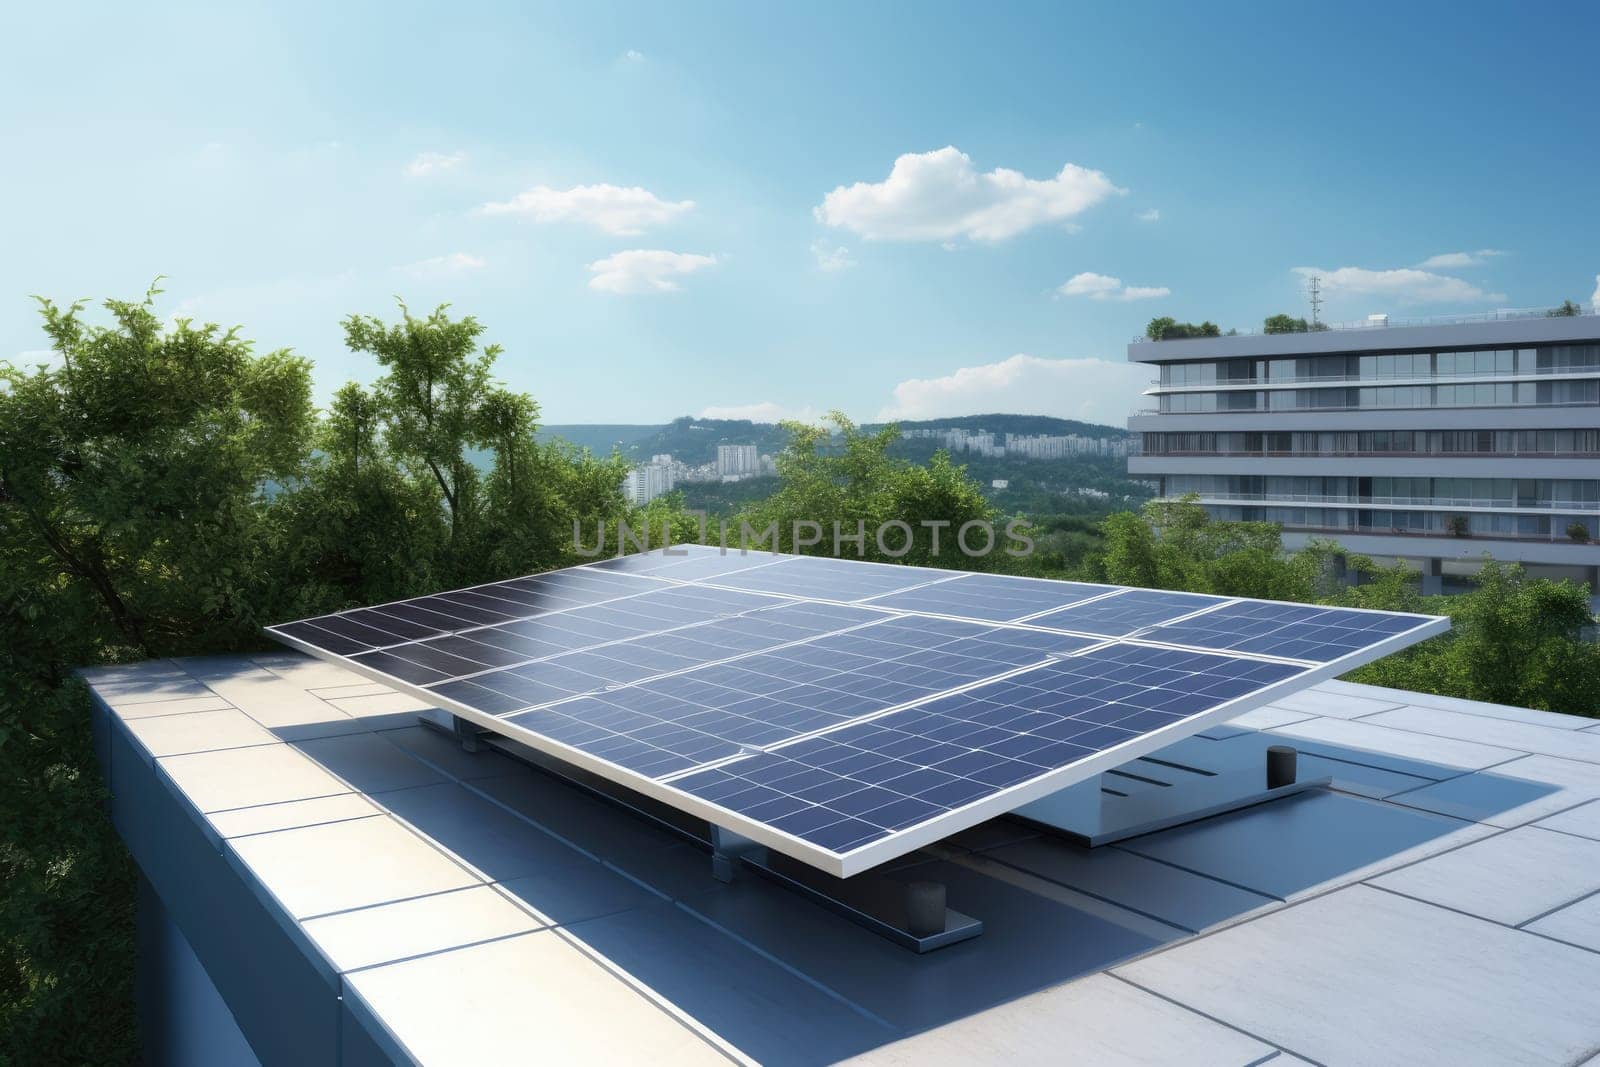 A row of solar panels installed on the rooftop of an urban building, providing a green energy solution for sustainable power generation in the city during a sunny day with clear blue skies.